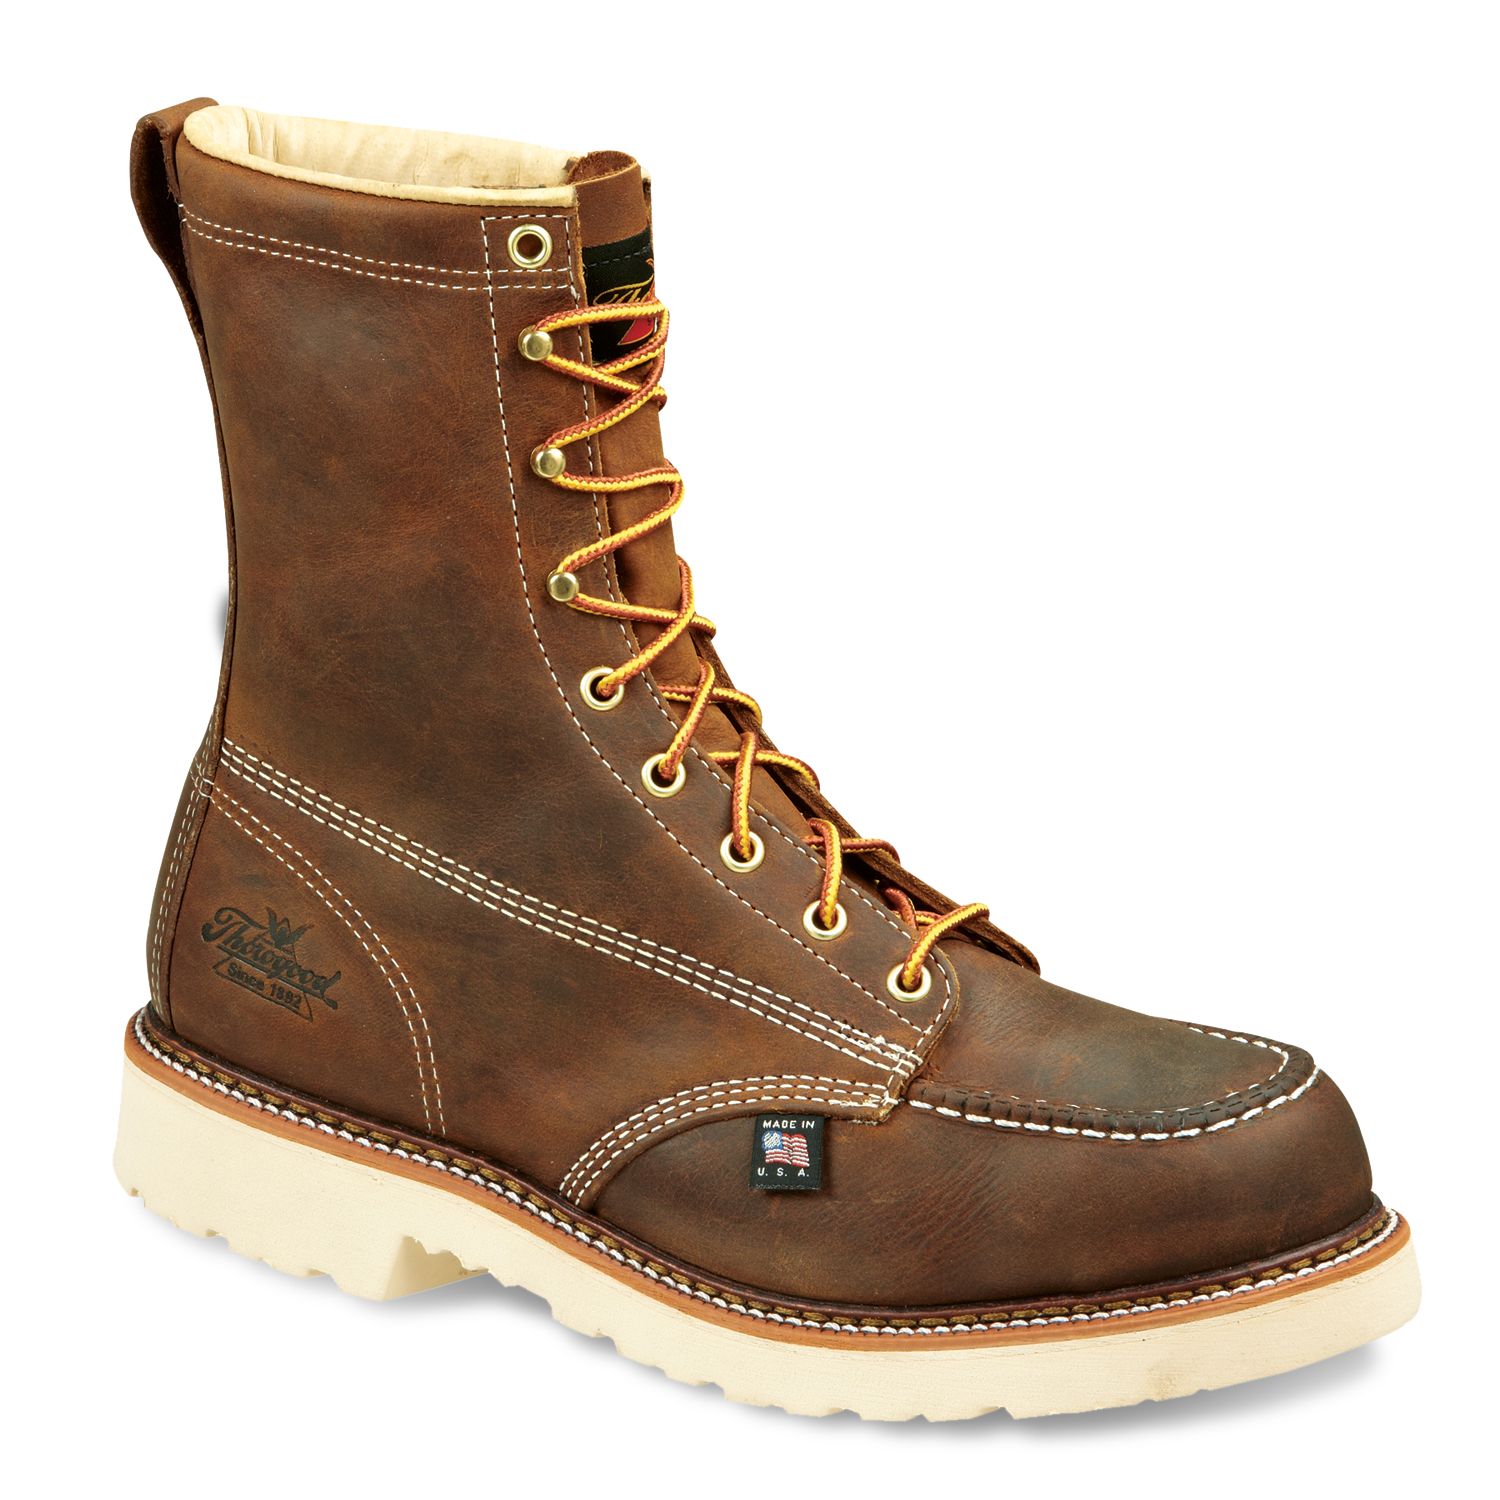 where to buy thorogood boots near me